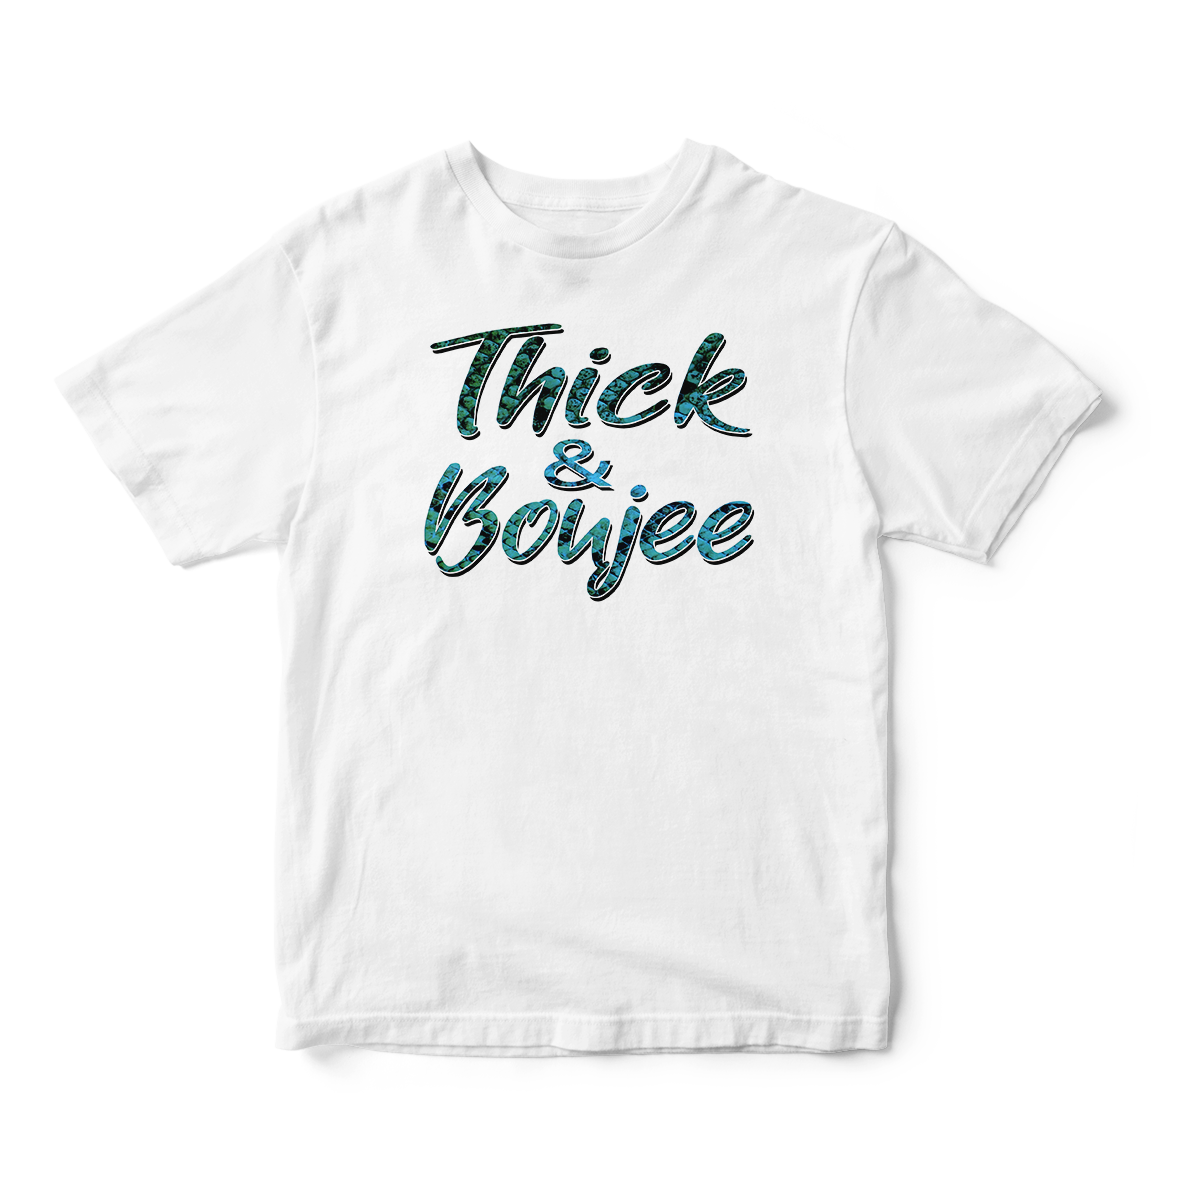 Thick & Boujee in Blue Short Sleeve Tee